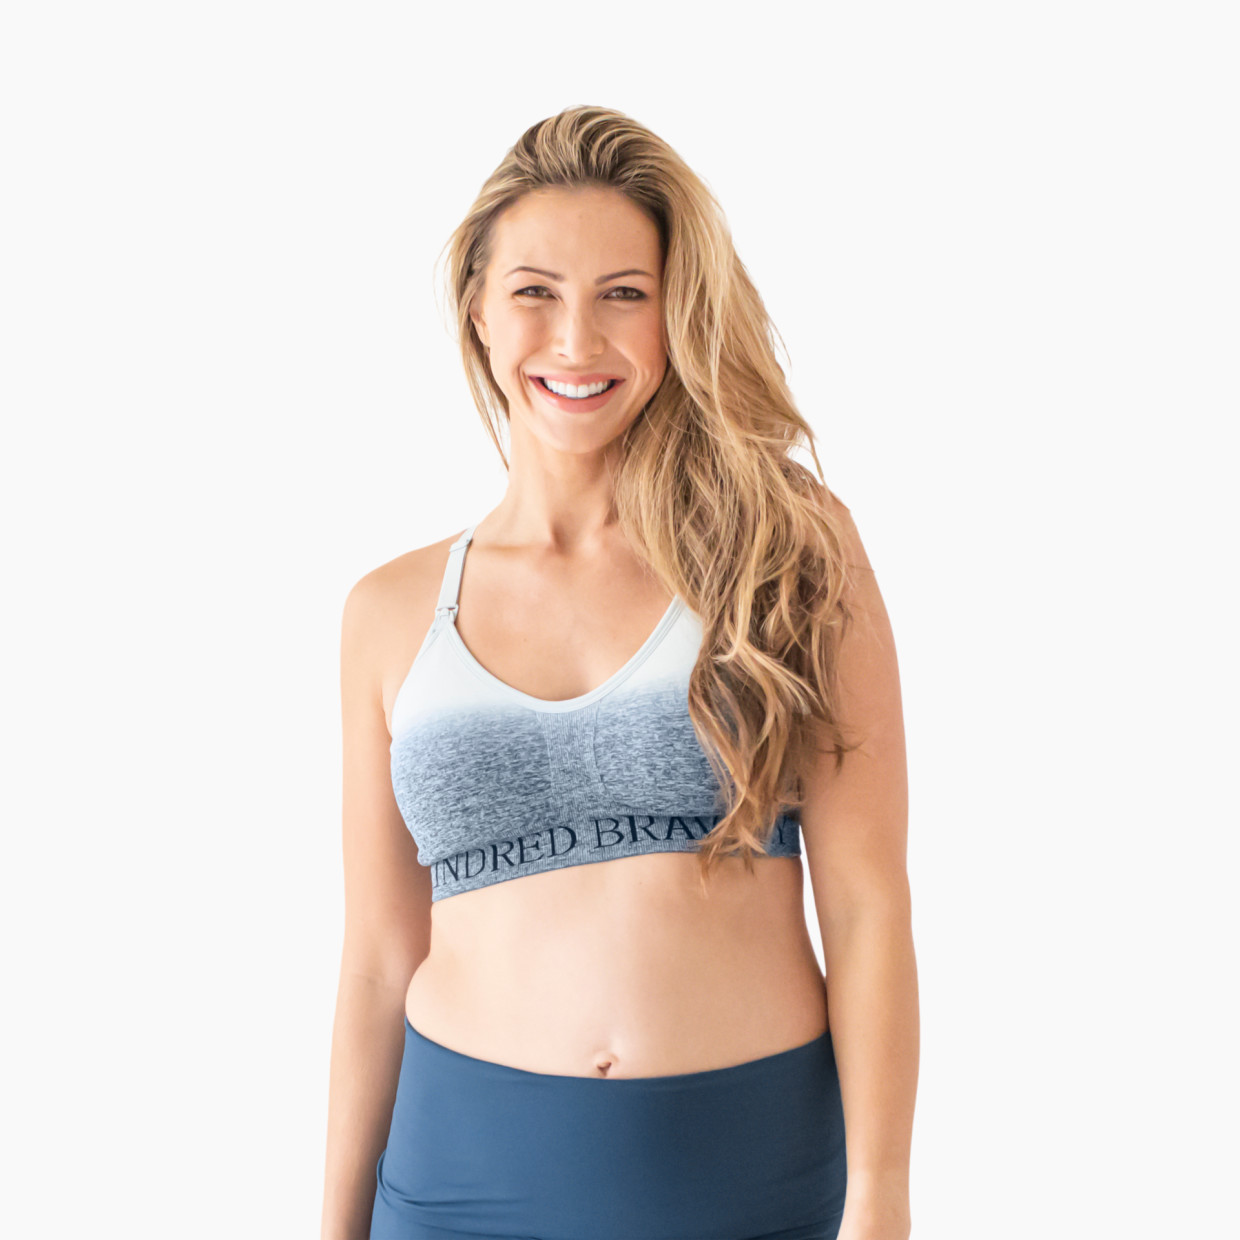 Kindred Bravely Sublime Support Low Impact Nursing & Maternity Sports Bra - Ombre Storm, Medium.